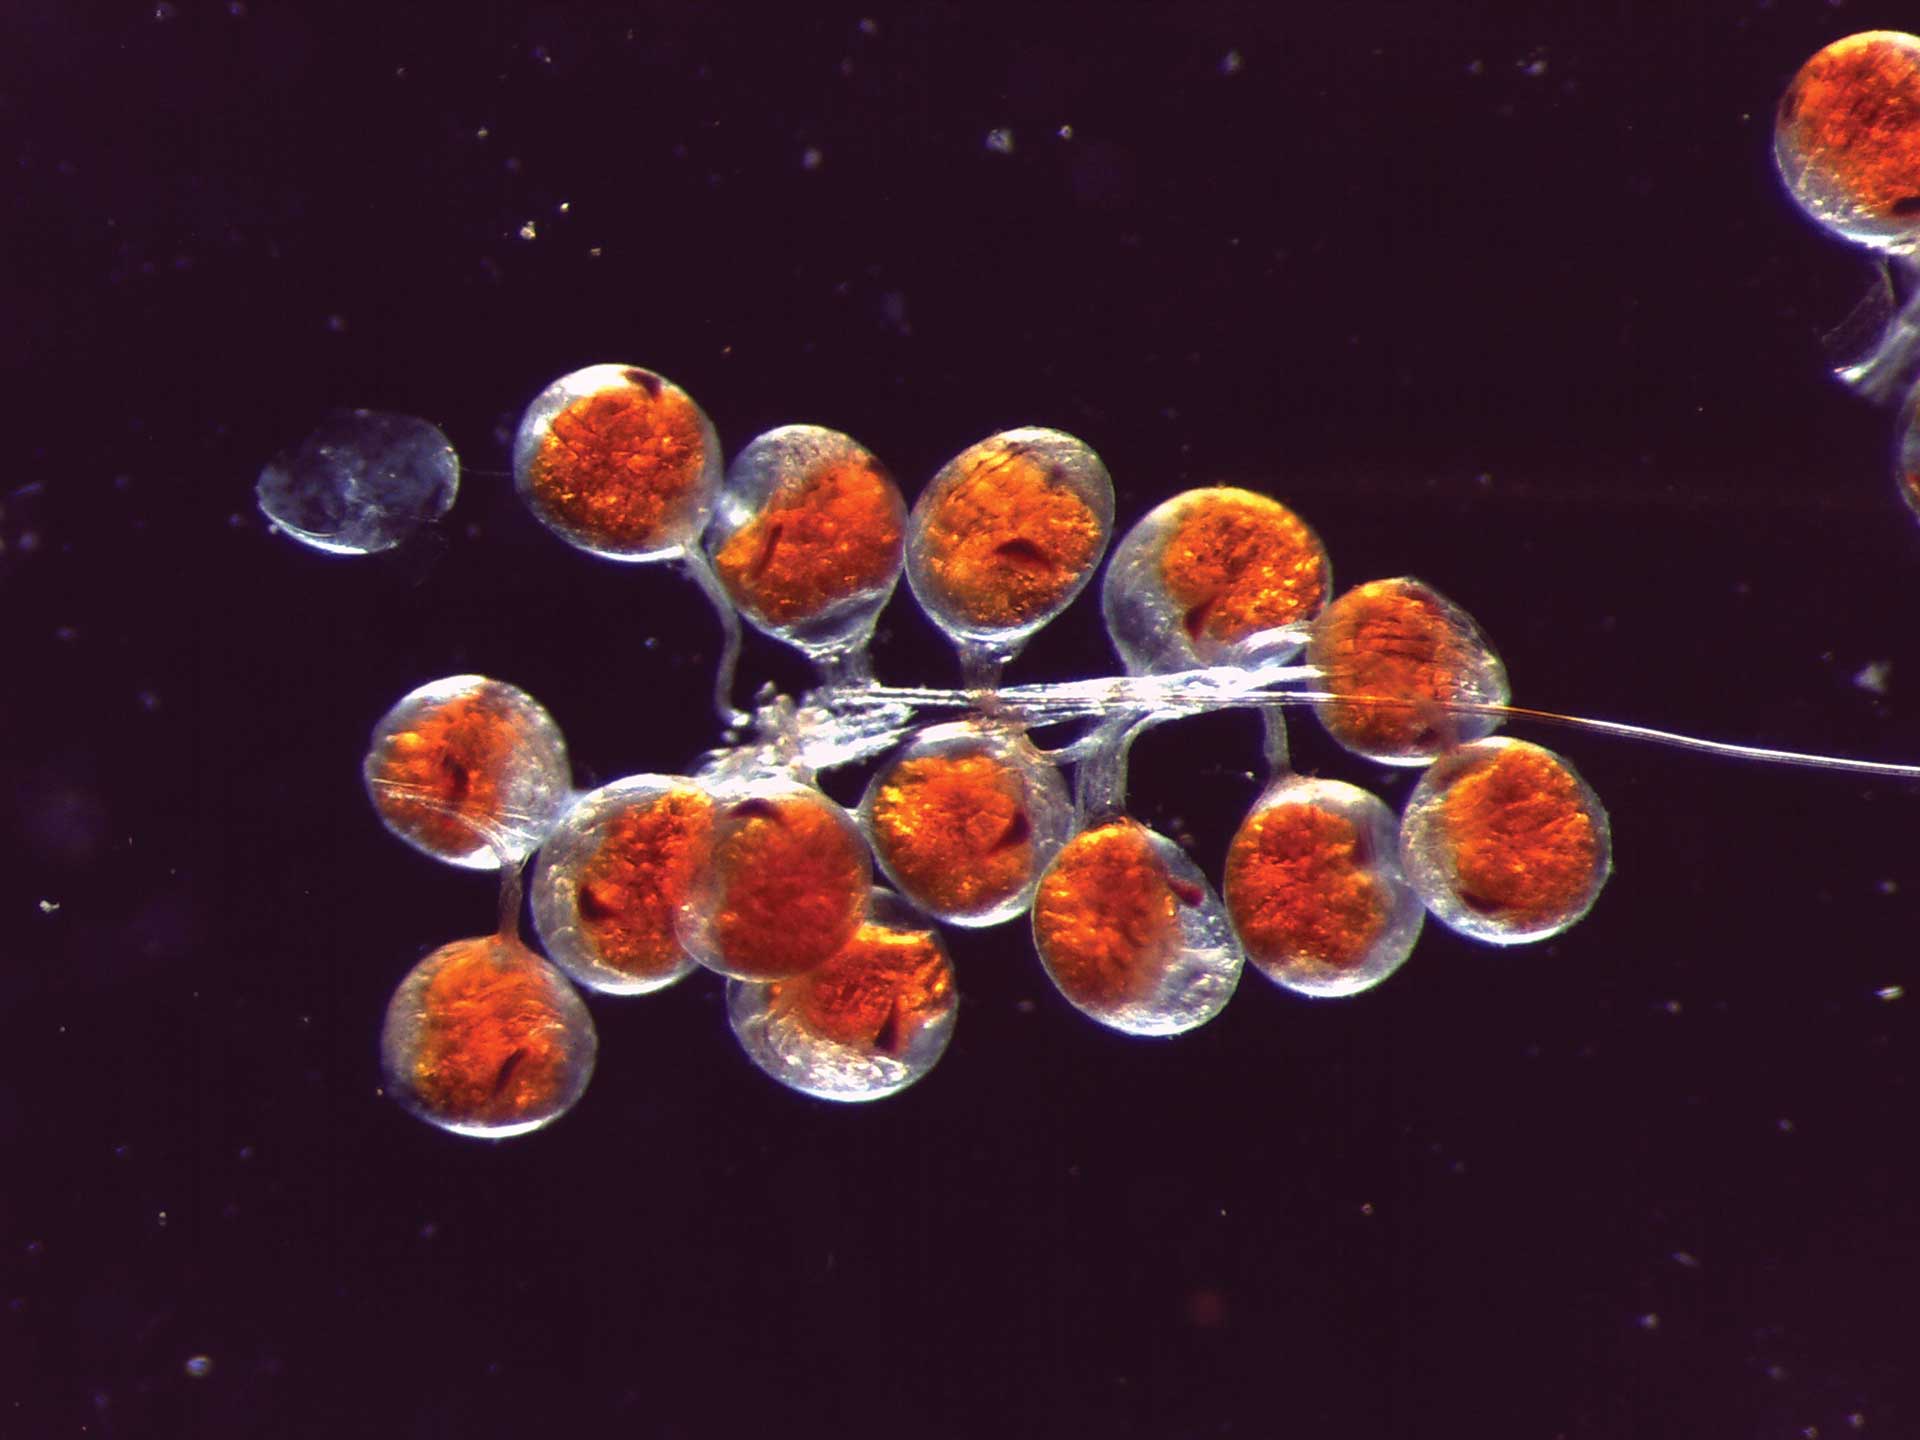 Spider crab embryos in transmitted light darkfield. Acquired with ZEISS Stemi 508